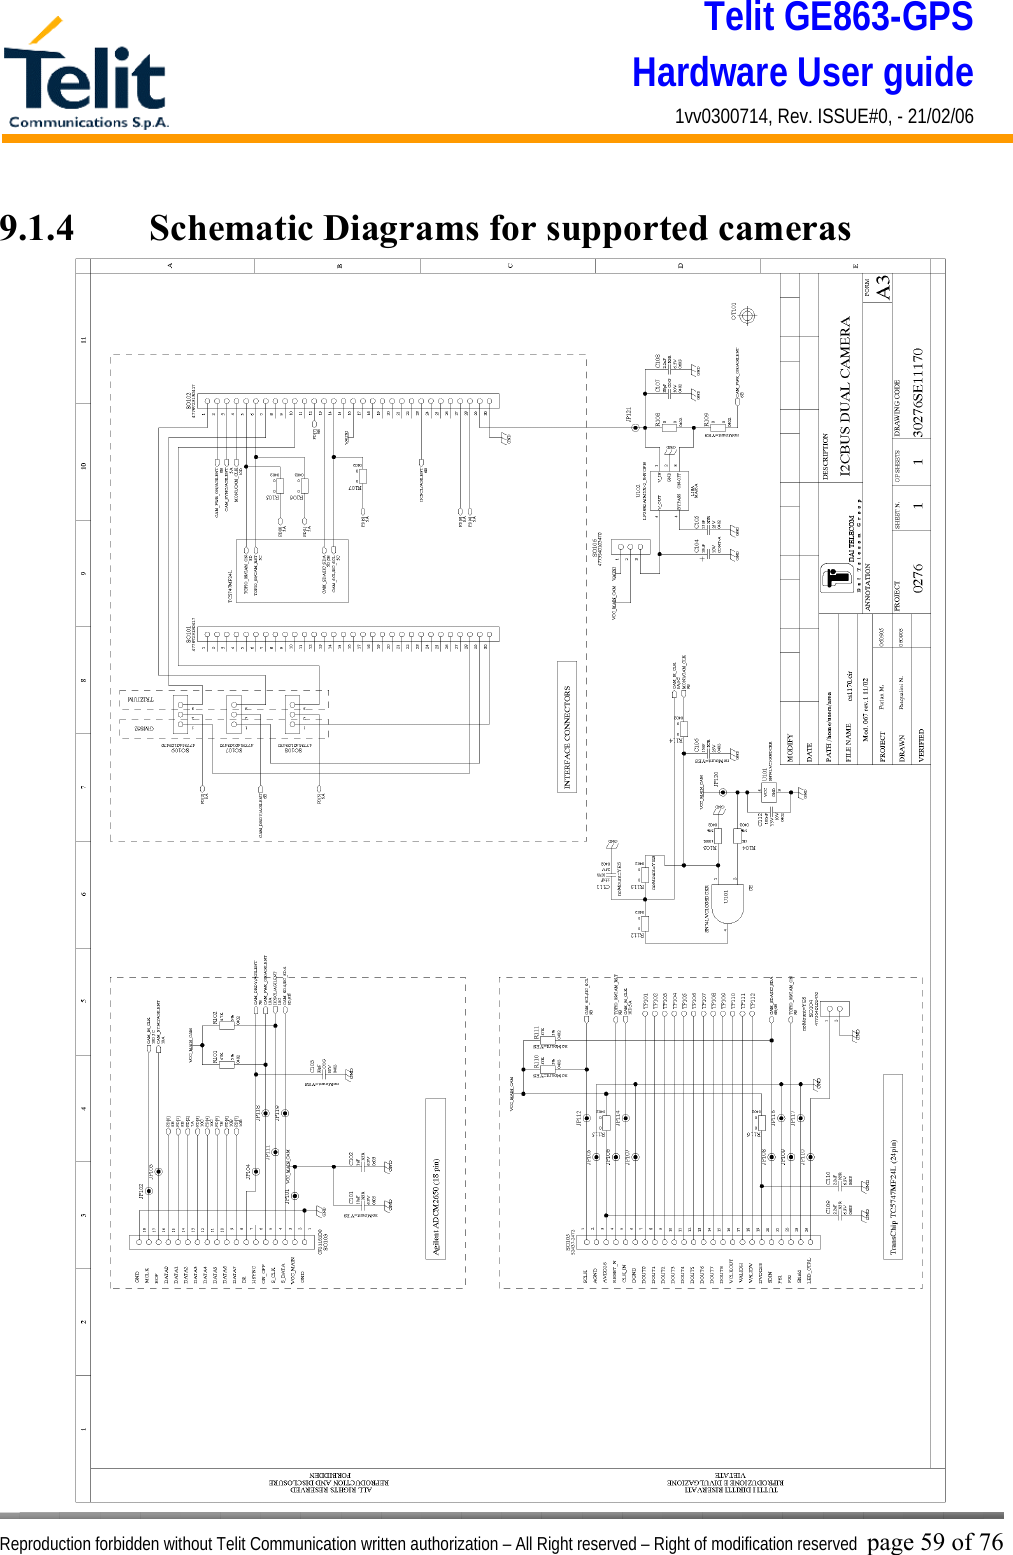 Telit GE863-GPS Hardware User guide 1vv0300714, Rev. ISSUE#0, - 21/02/06    Reproduction forbidden without Telit Communication written authorization – All Right reserved – Right of modification reserved page 59 of 76 9.1.4   Schematic Diagrams for supported cameras  